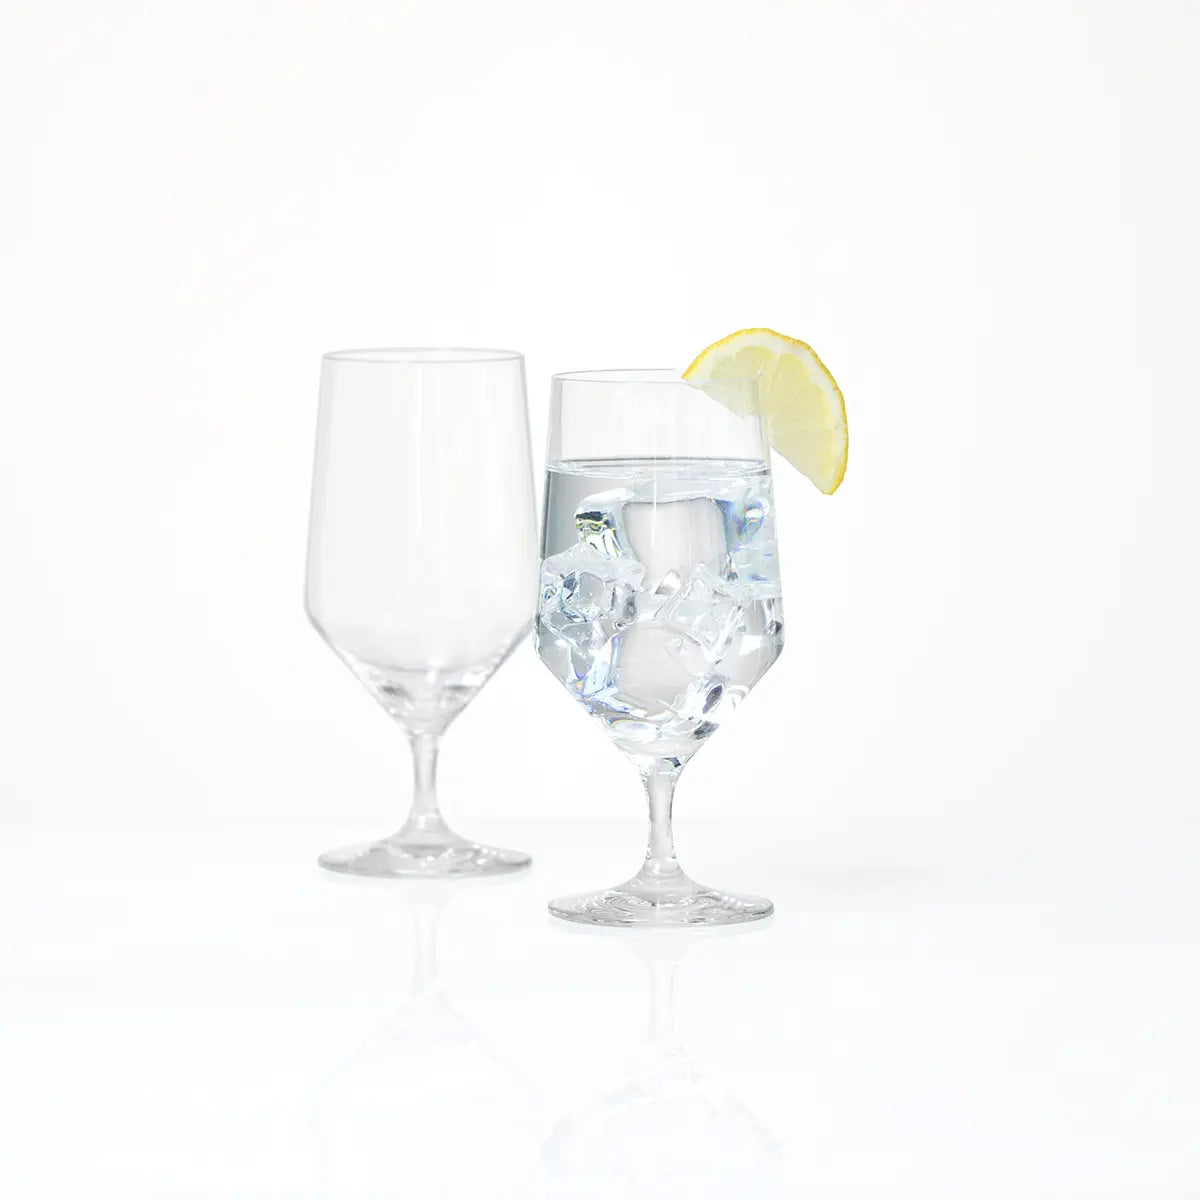 Pair of Fortessa Tritan Pure Beverage Water Glass with one filled with a lemon and one unfilled